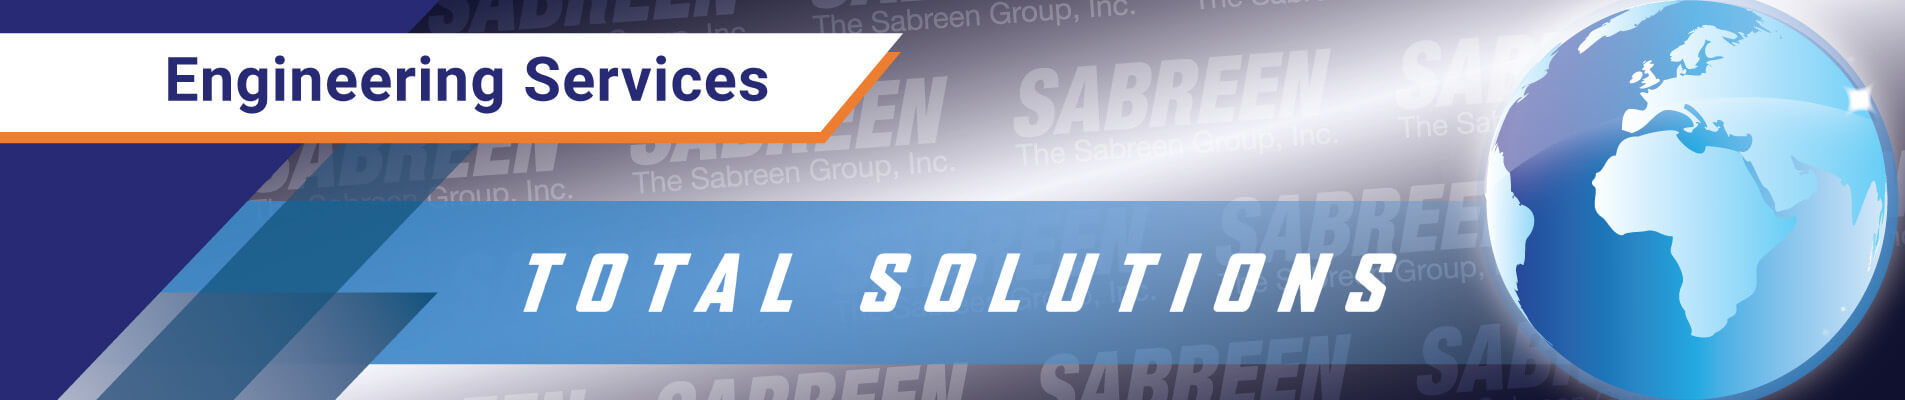 Engineering Services - The Sabreen Group, Inc.